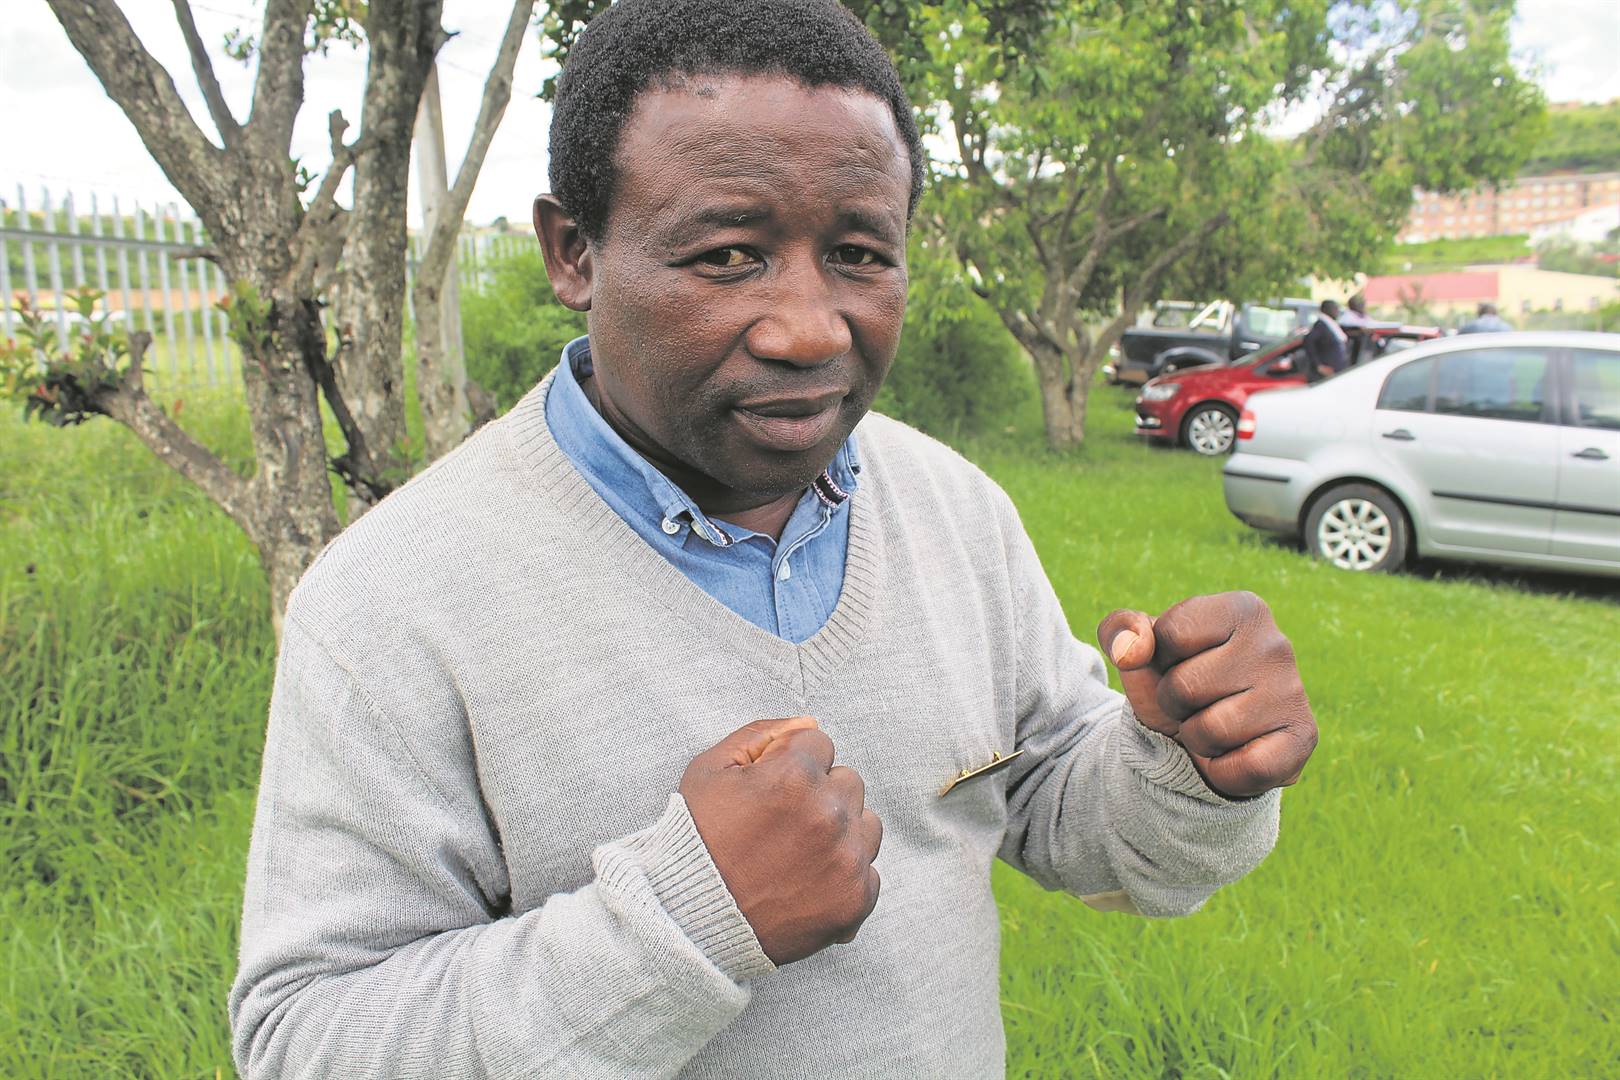 Amateur Boxing Federation chairperson in Mnquma, Mbuyiseli Xokolo. 